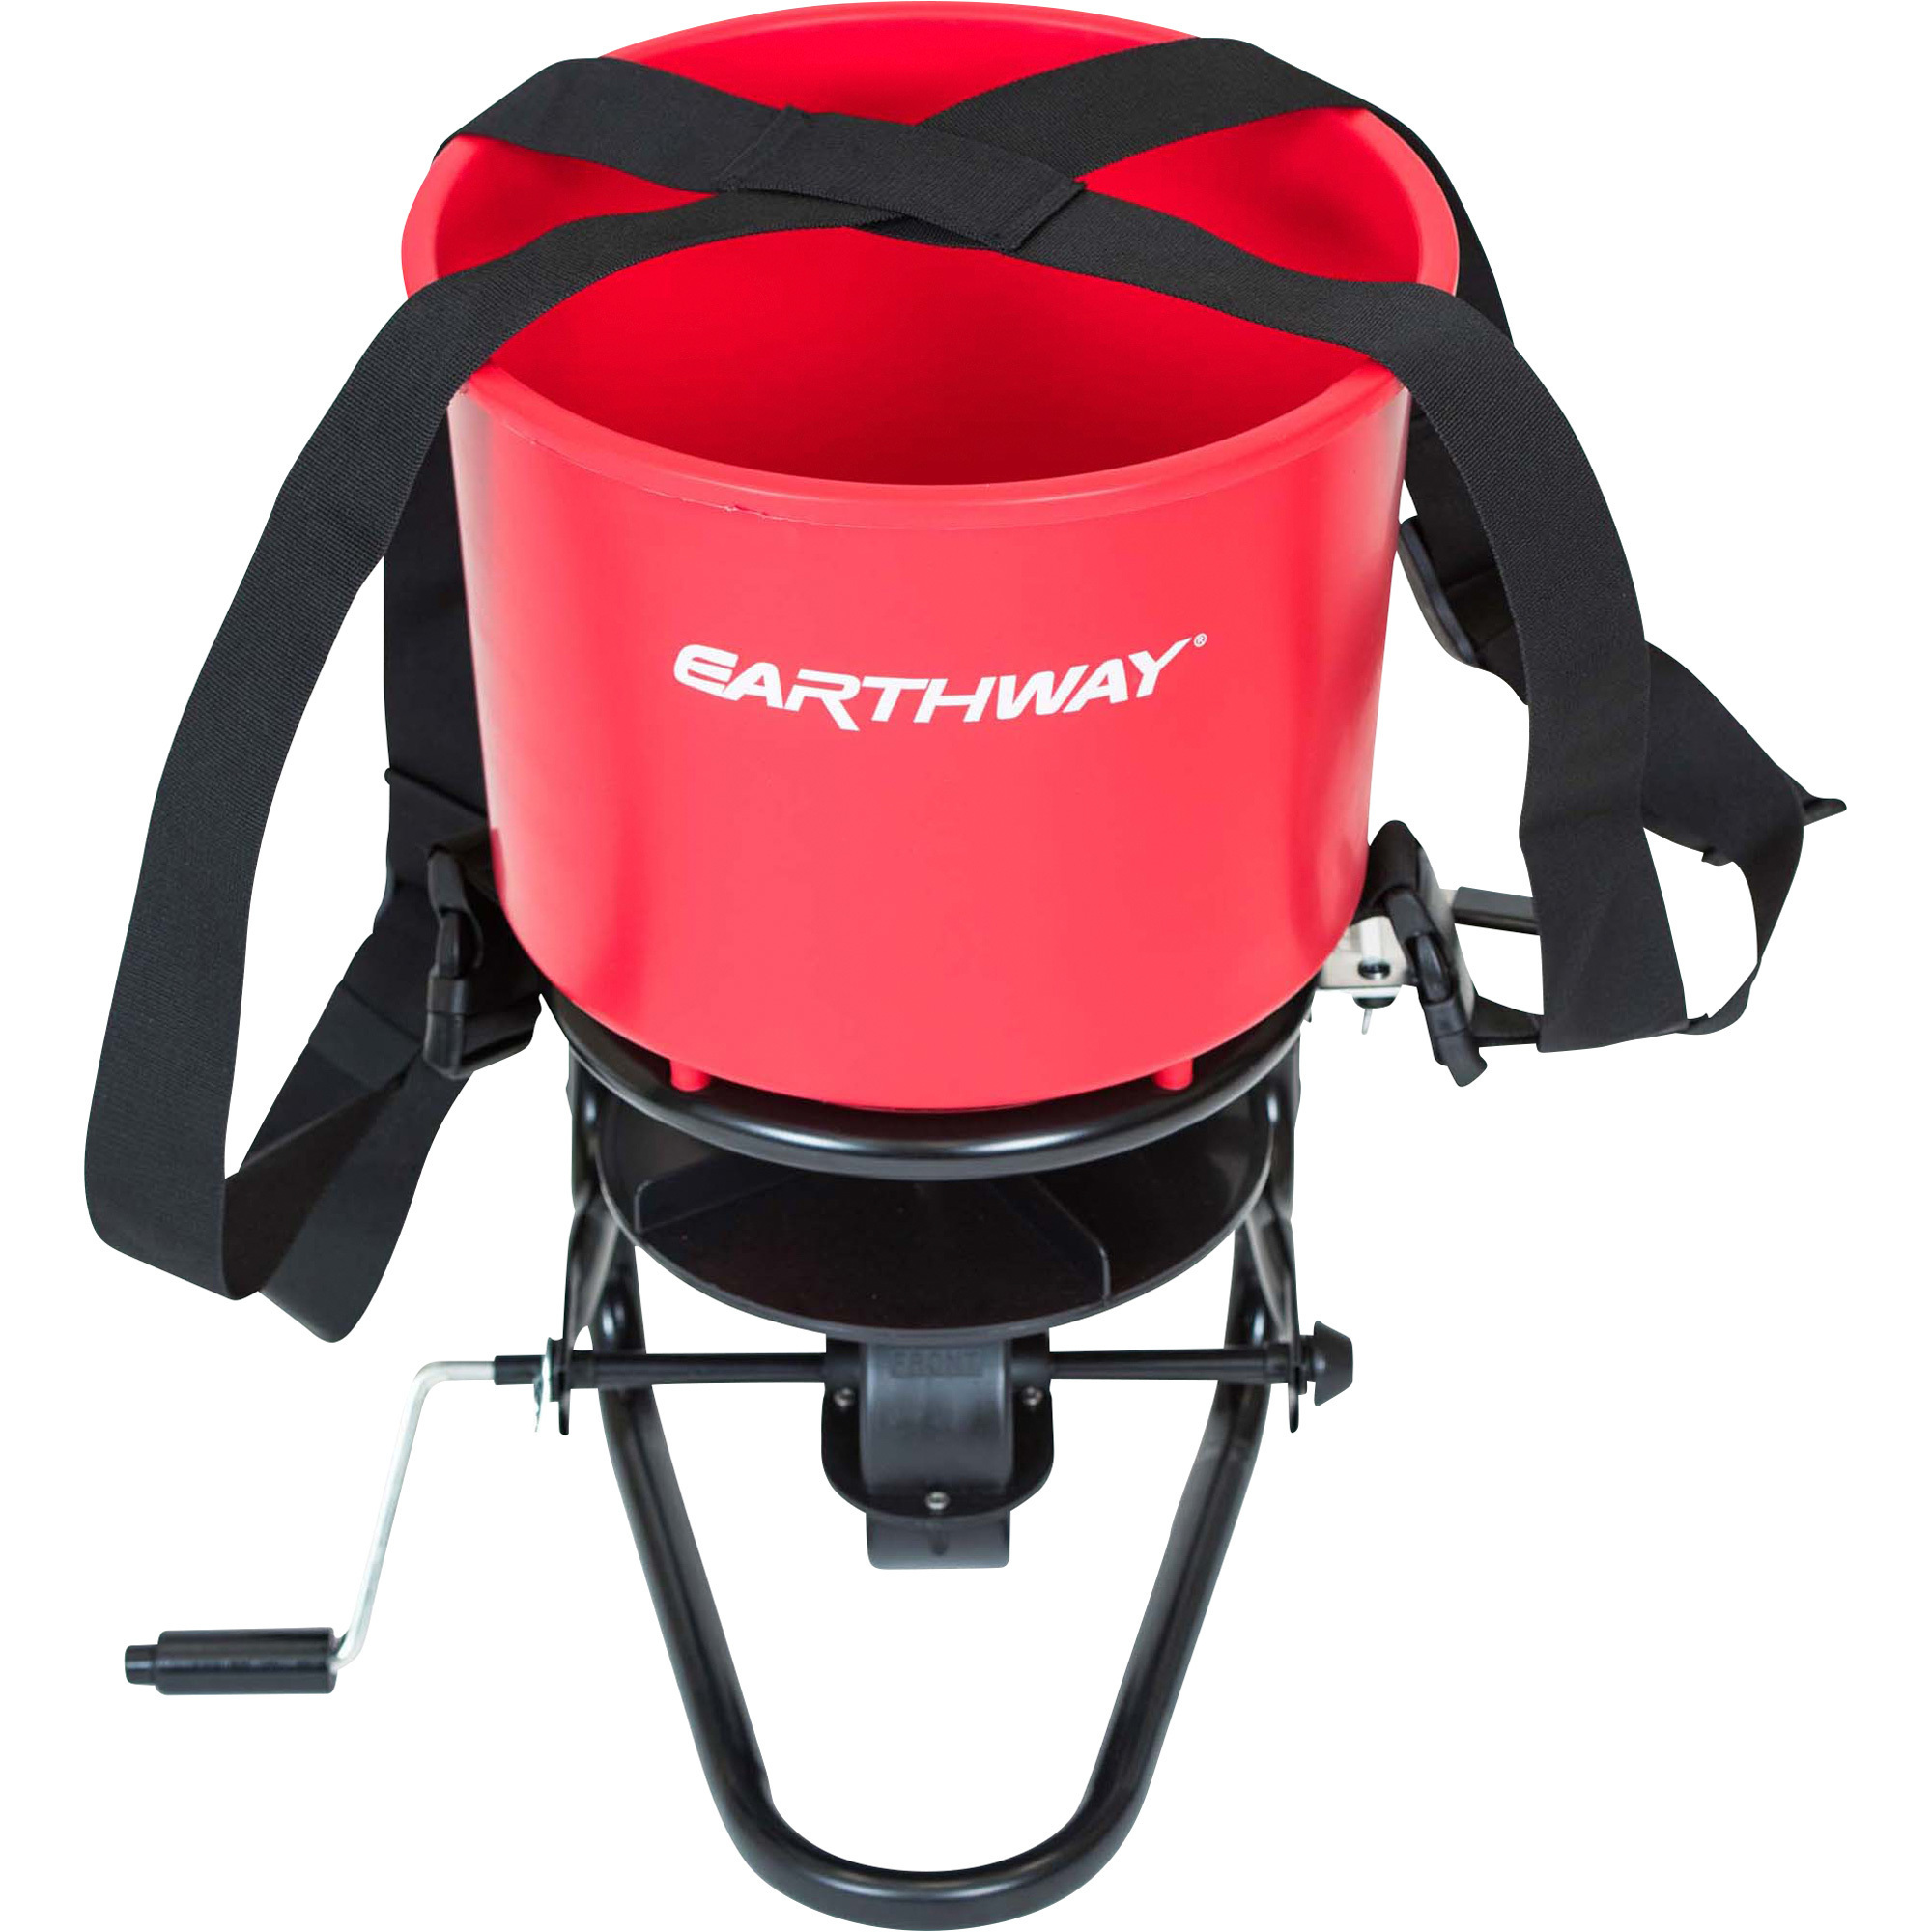 Earthway Pro Hand-Operated Spreader with Harness System â 40-Lb. Capacity, Model 16014